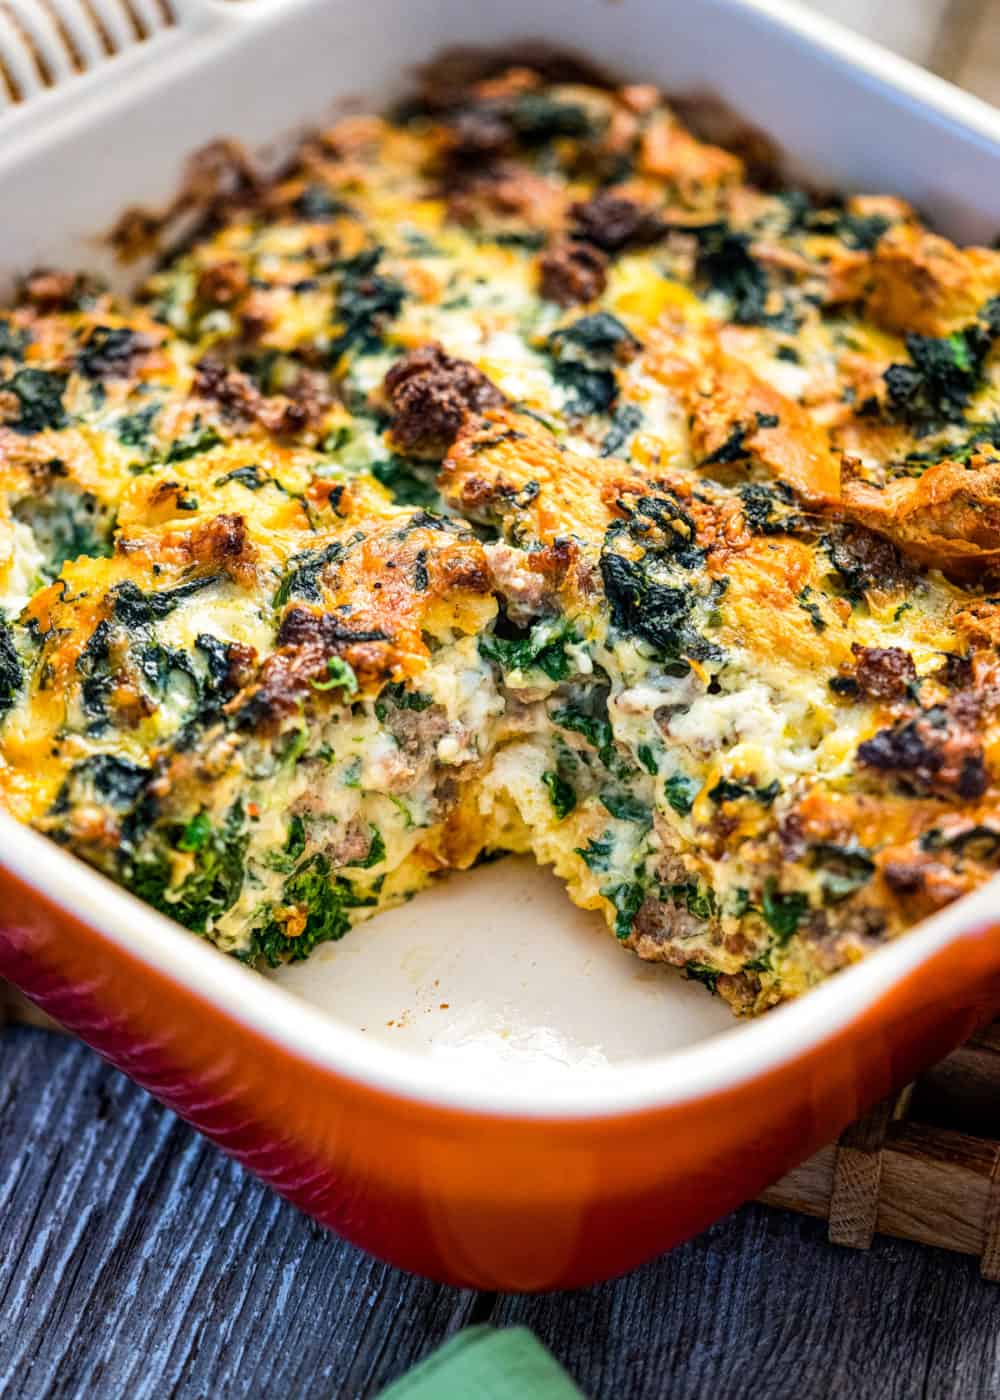 holiday breakfast casserole in red baking dish